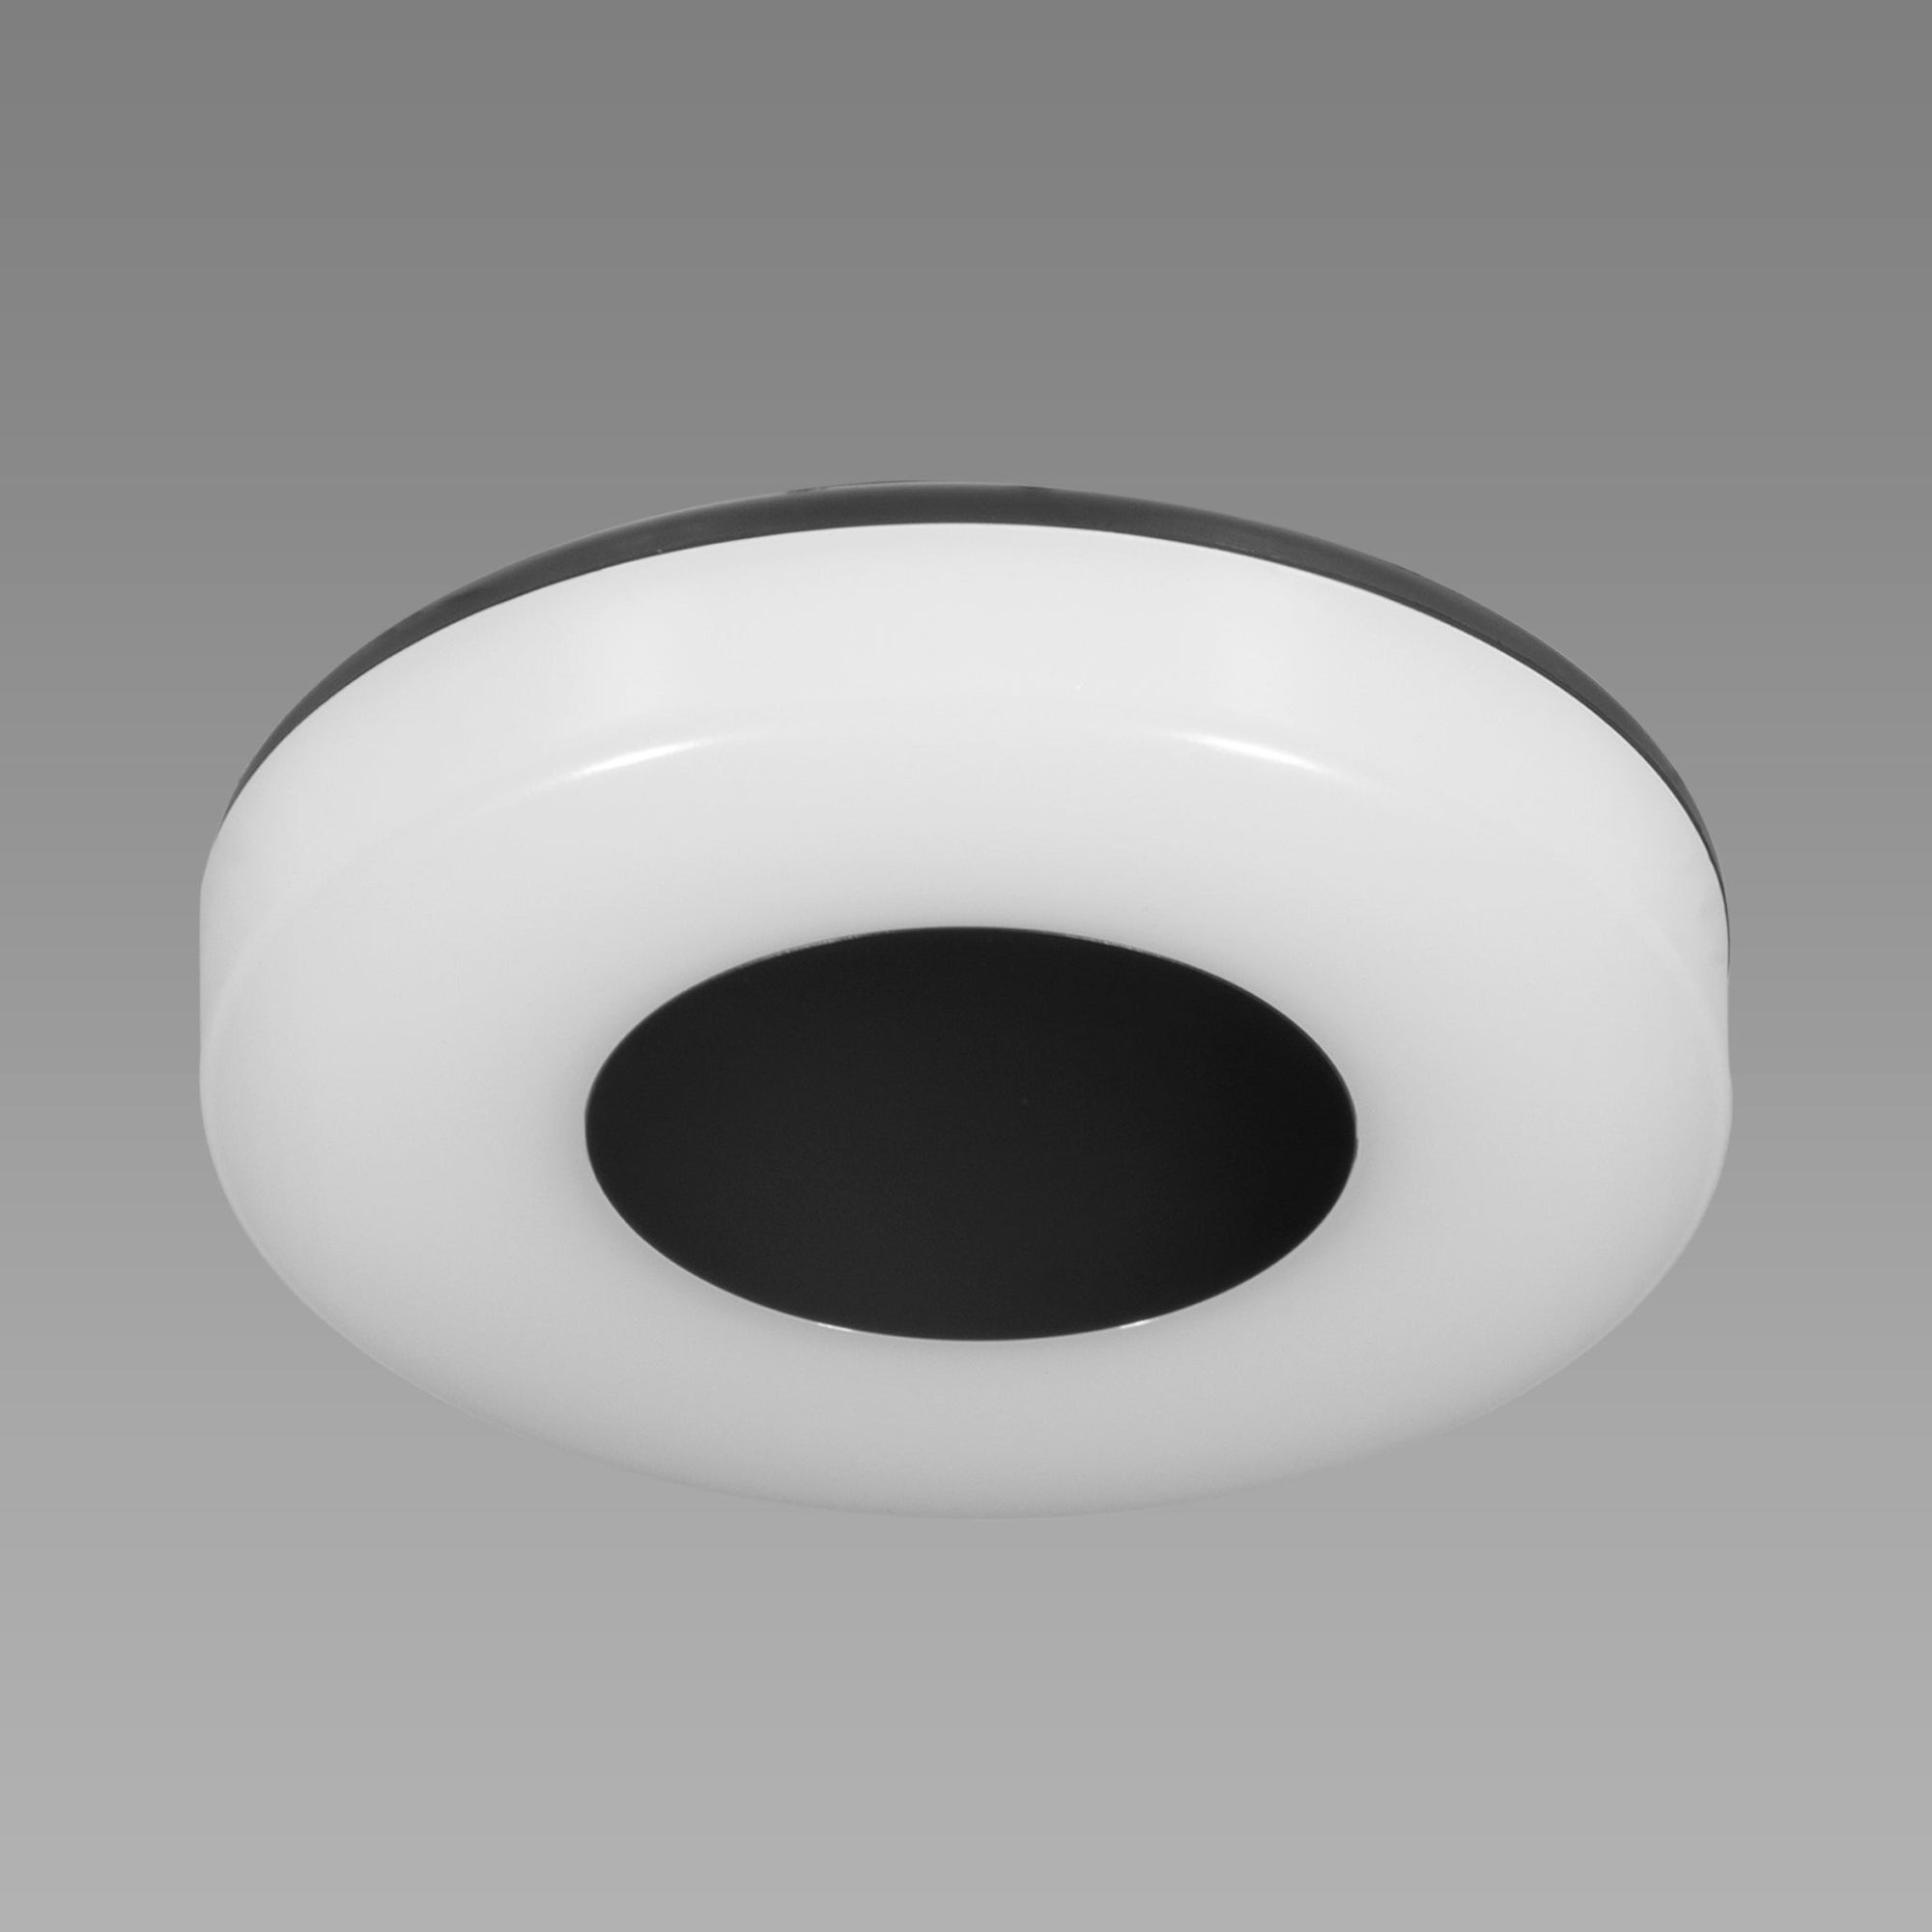 Shop Uncomplicated Medium Outdoor LED Ceiling Light online